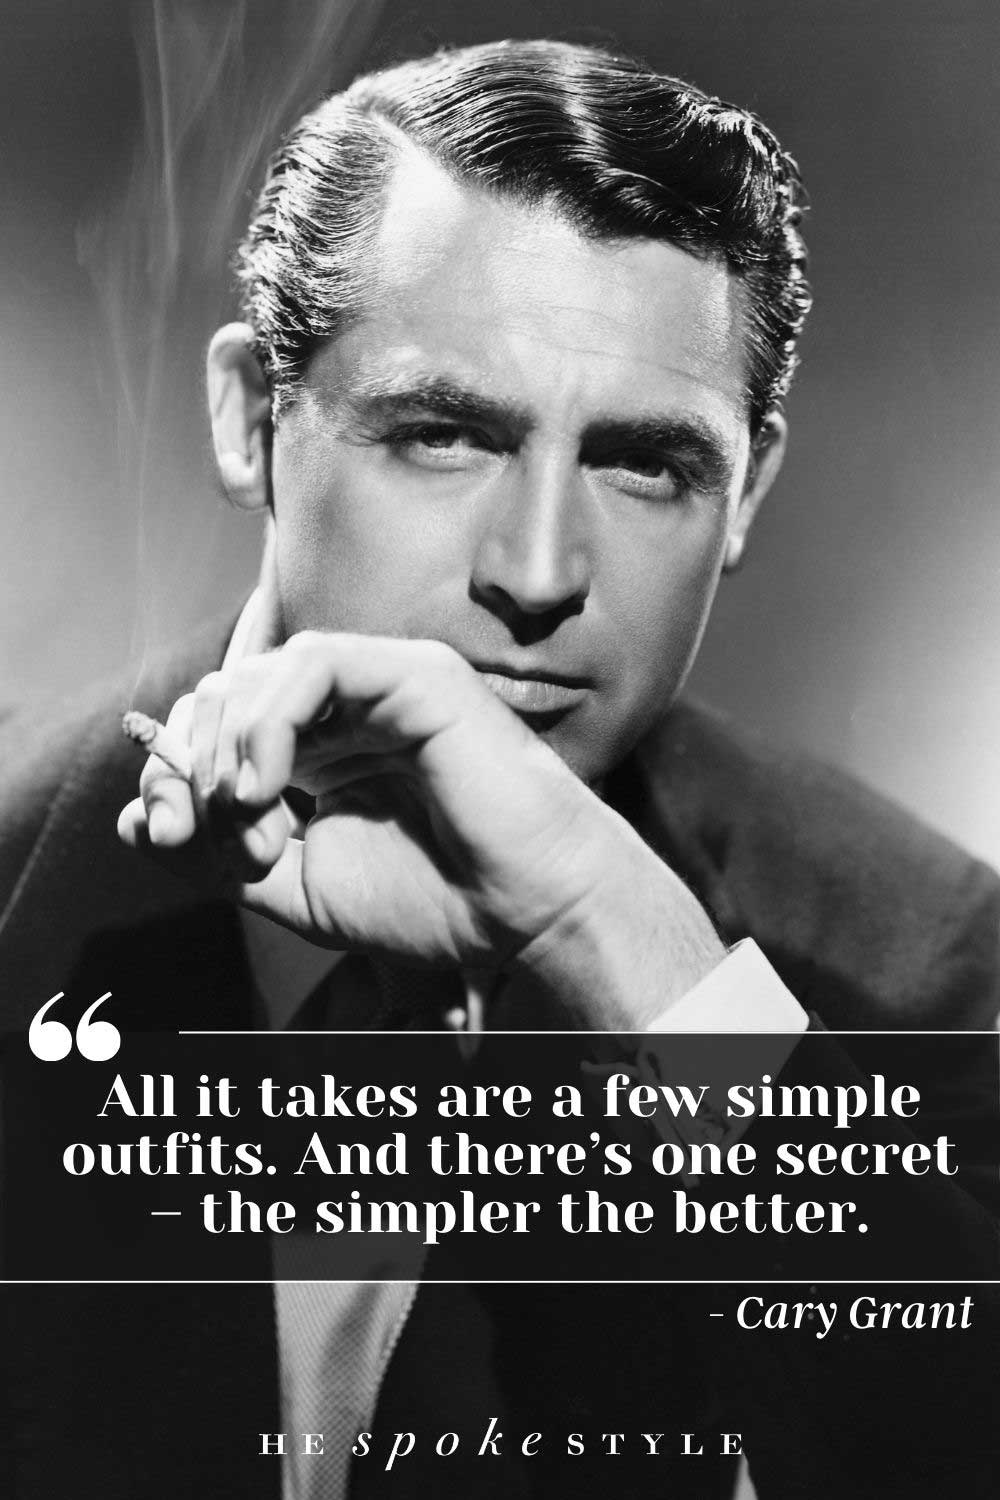 cary grant fashion quote